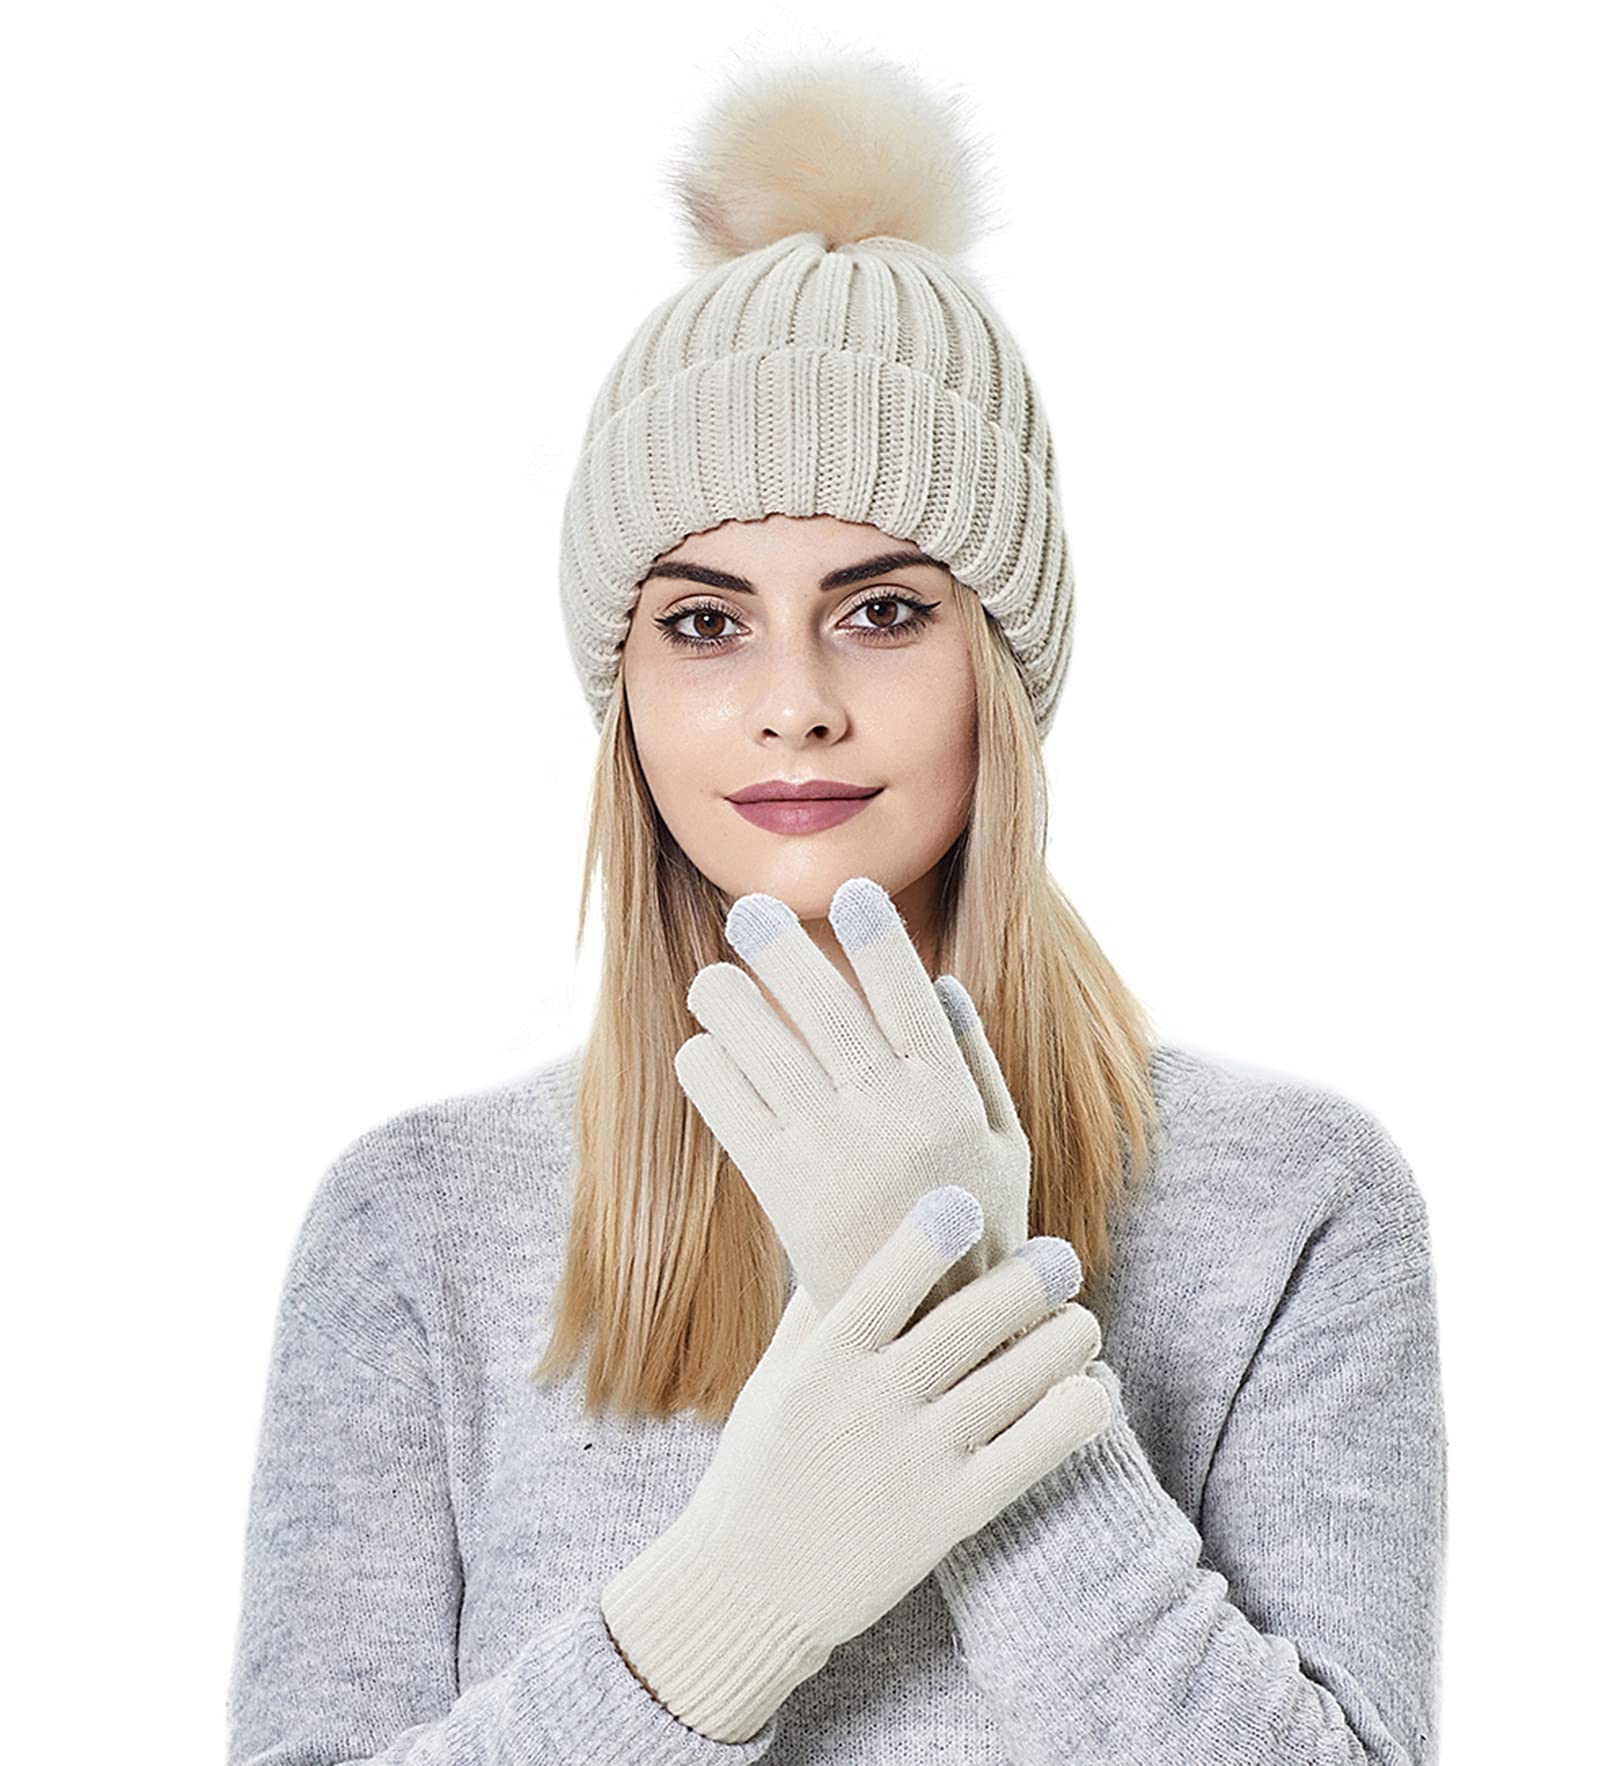 Muryobao 2 Pcs Womens Winter Knitted Beanie Hat Touch Screen Gloves Set Warm Knit Cuffed Skull Cap with Faux Fur Pom Beige